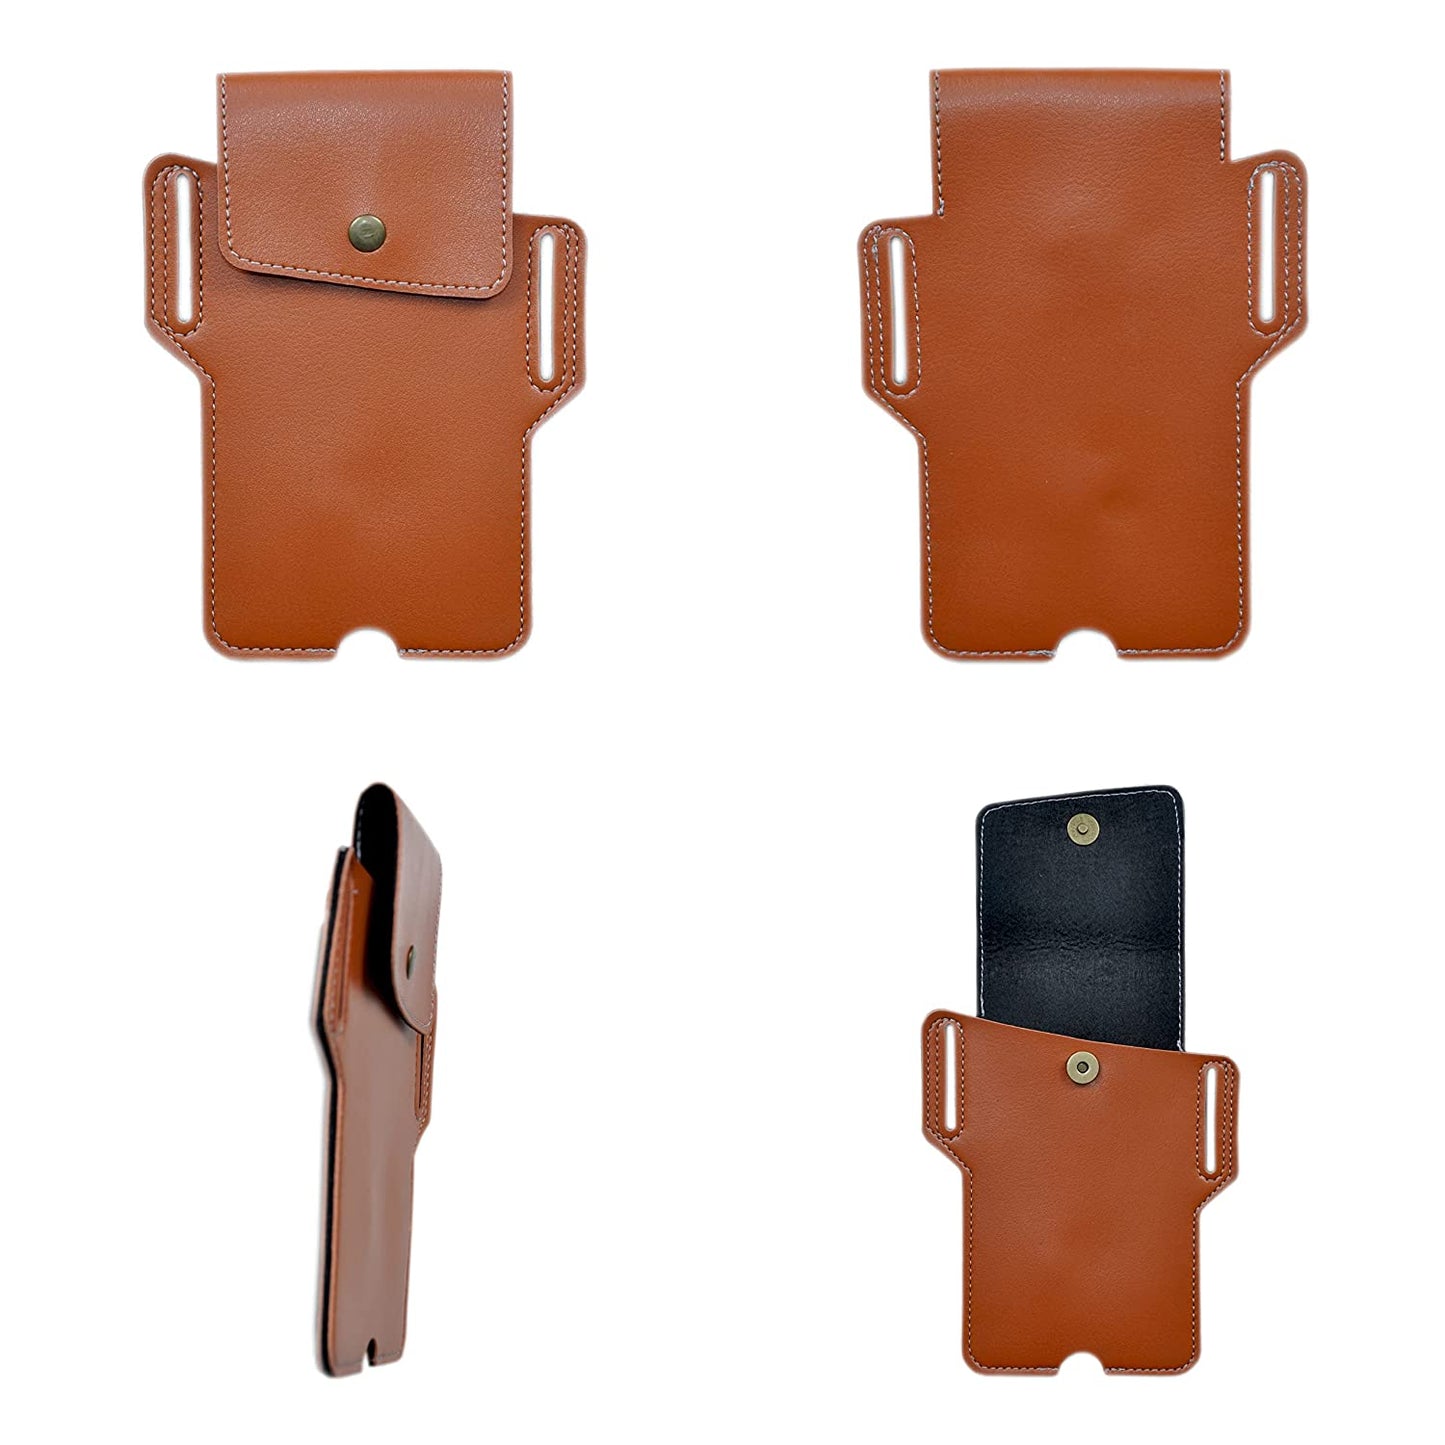 Mobile Leather Belt Waist Cover Case For All Smart Phone